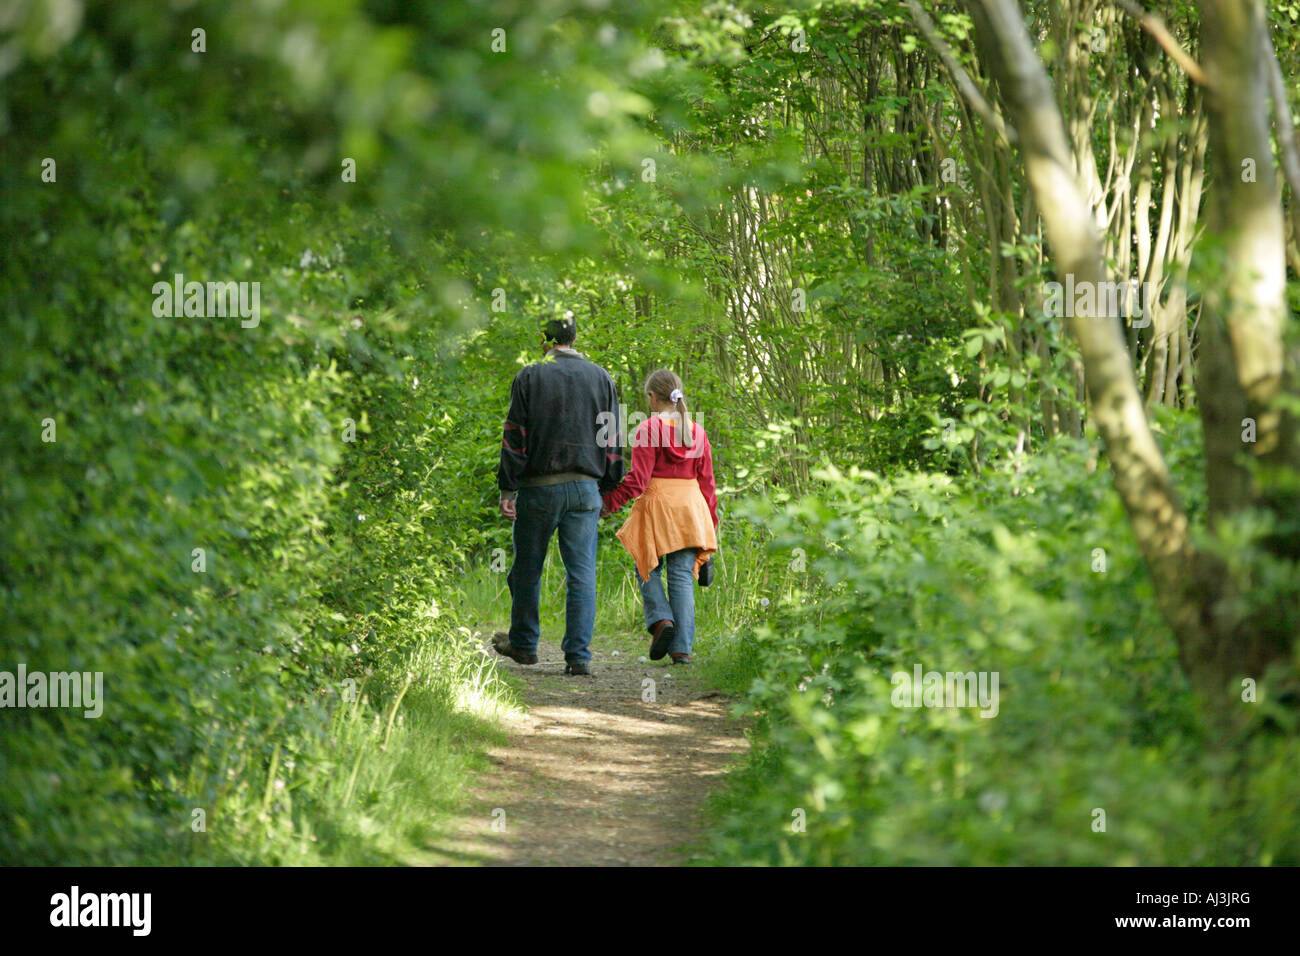 a man walking along a forest path holding a young girl by her hand Stock Photo